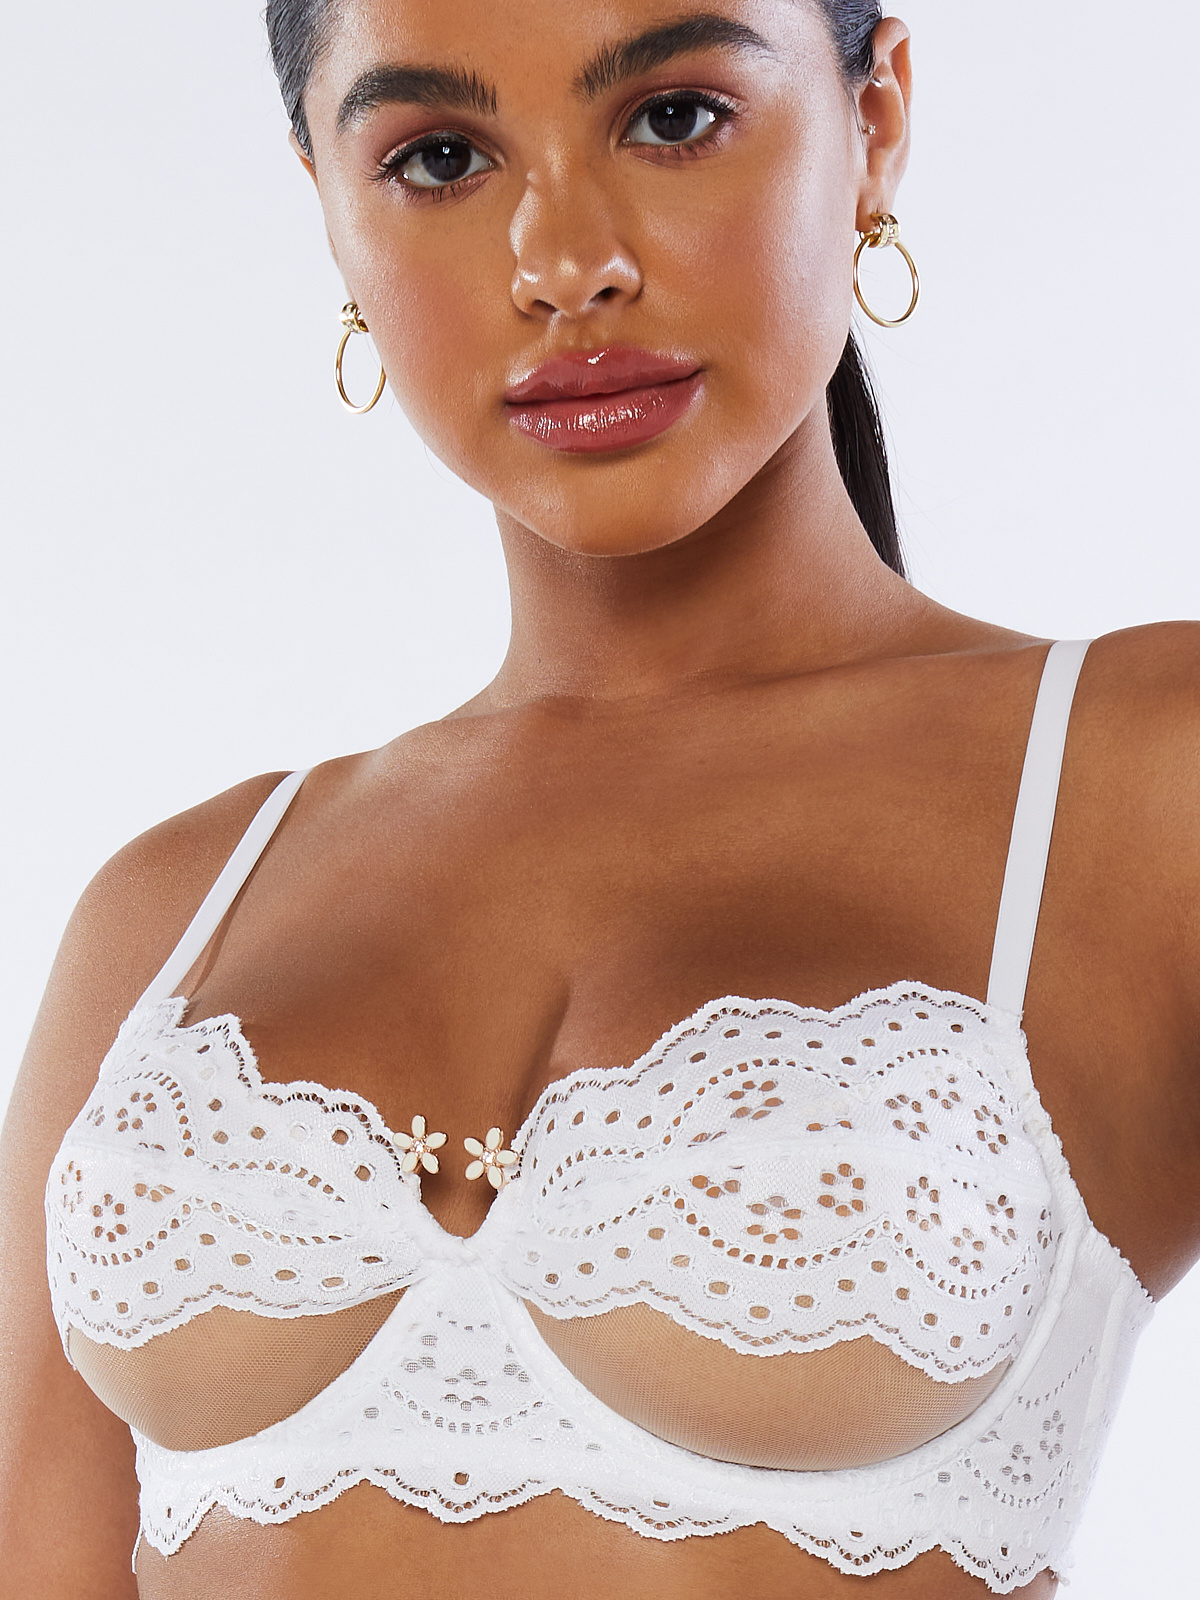 https://cdn.savagex.com/media/images/products/BA2147022-1140/BOMBSHELL-BRODERIE-UNLINED-LACE-BALCONETTE-BRA-BA2147022-1140-4-1200x1600.jpg